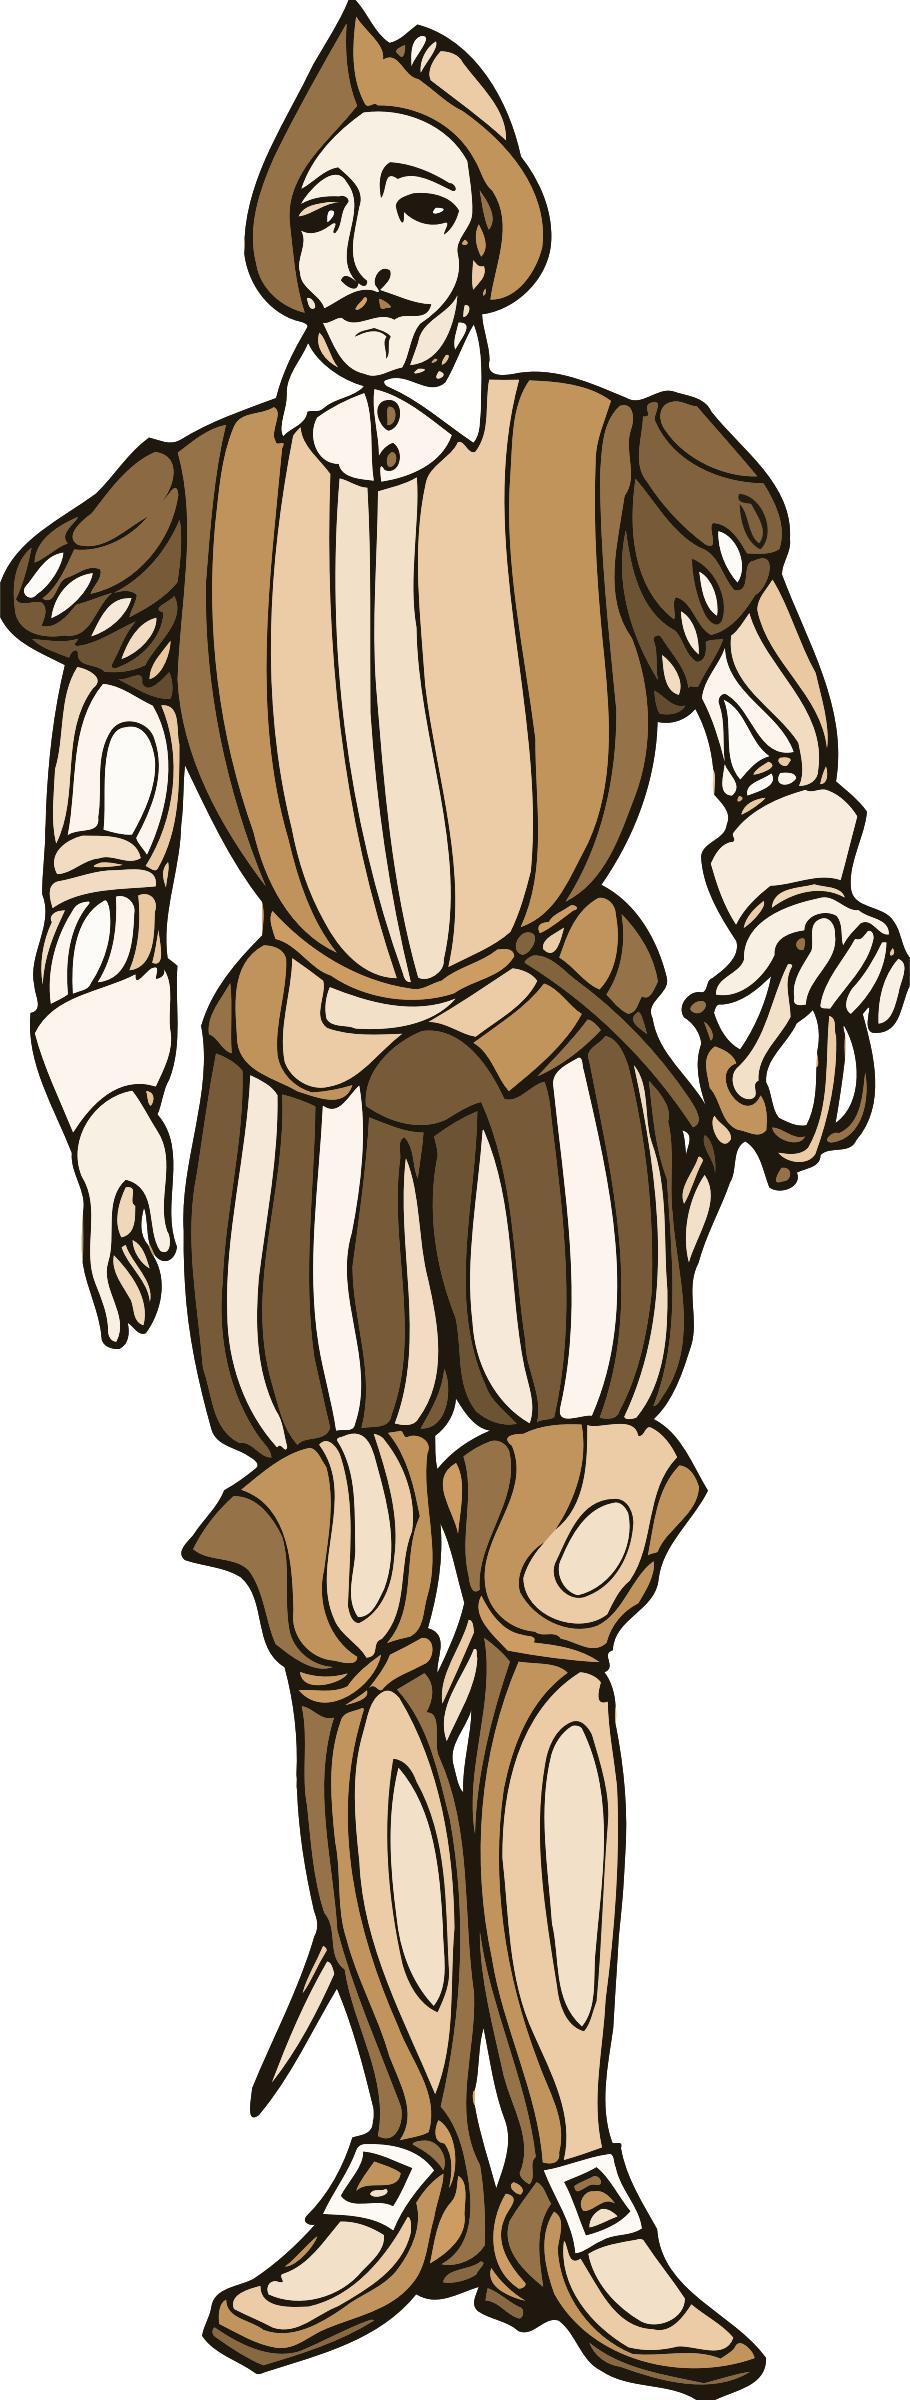 Shakespeare characters - soldier png transparent